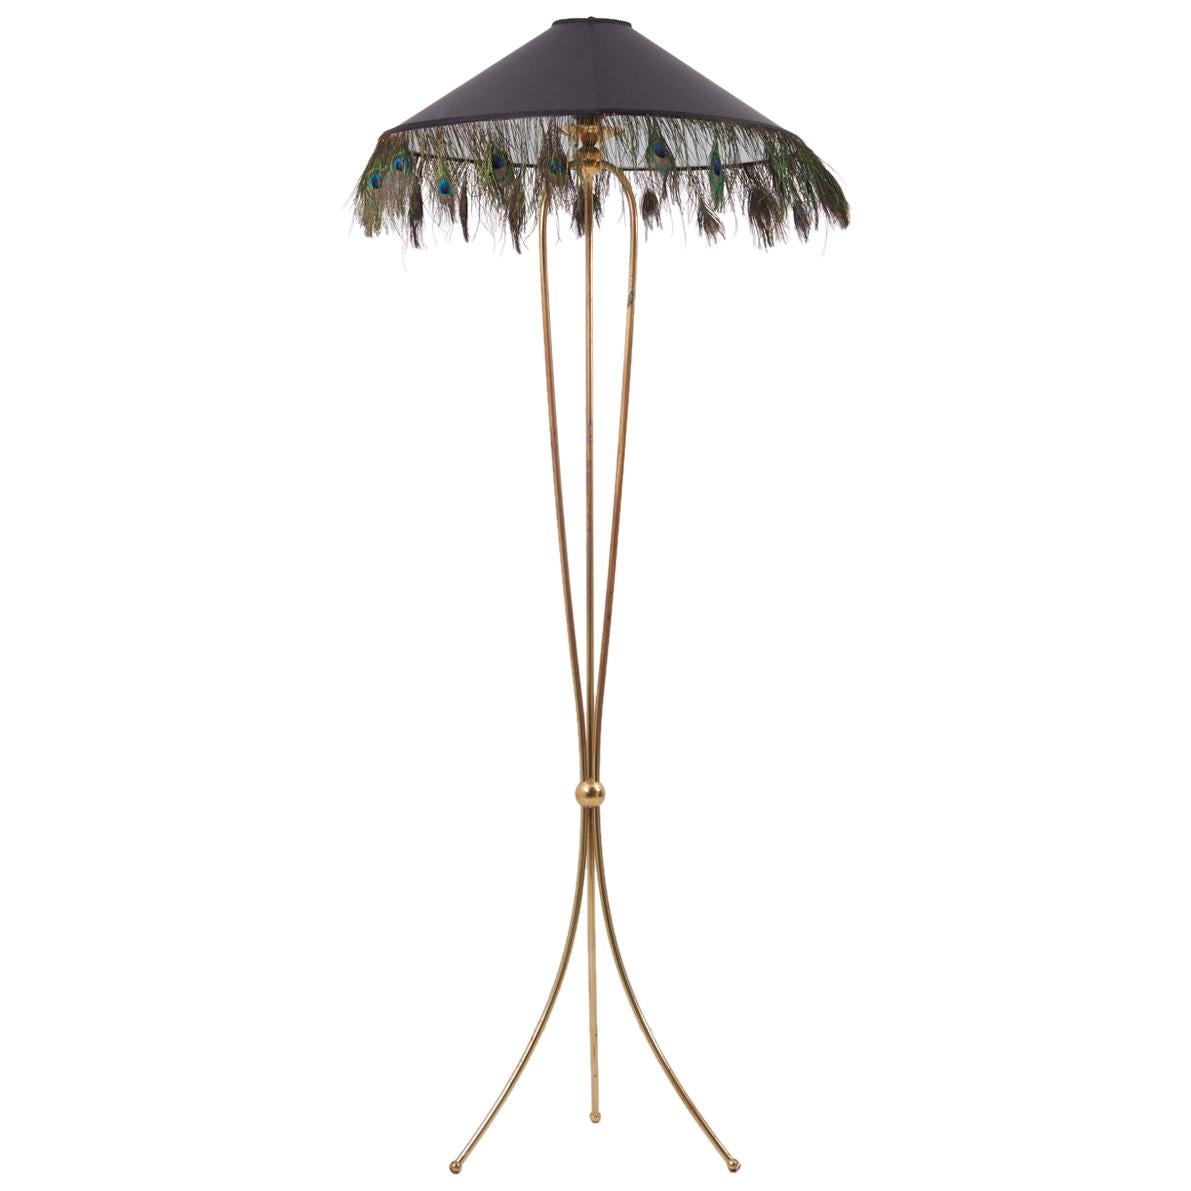 1950s Brass Floor Lamp with Peacock Feathers